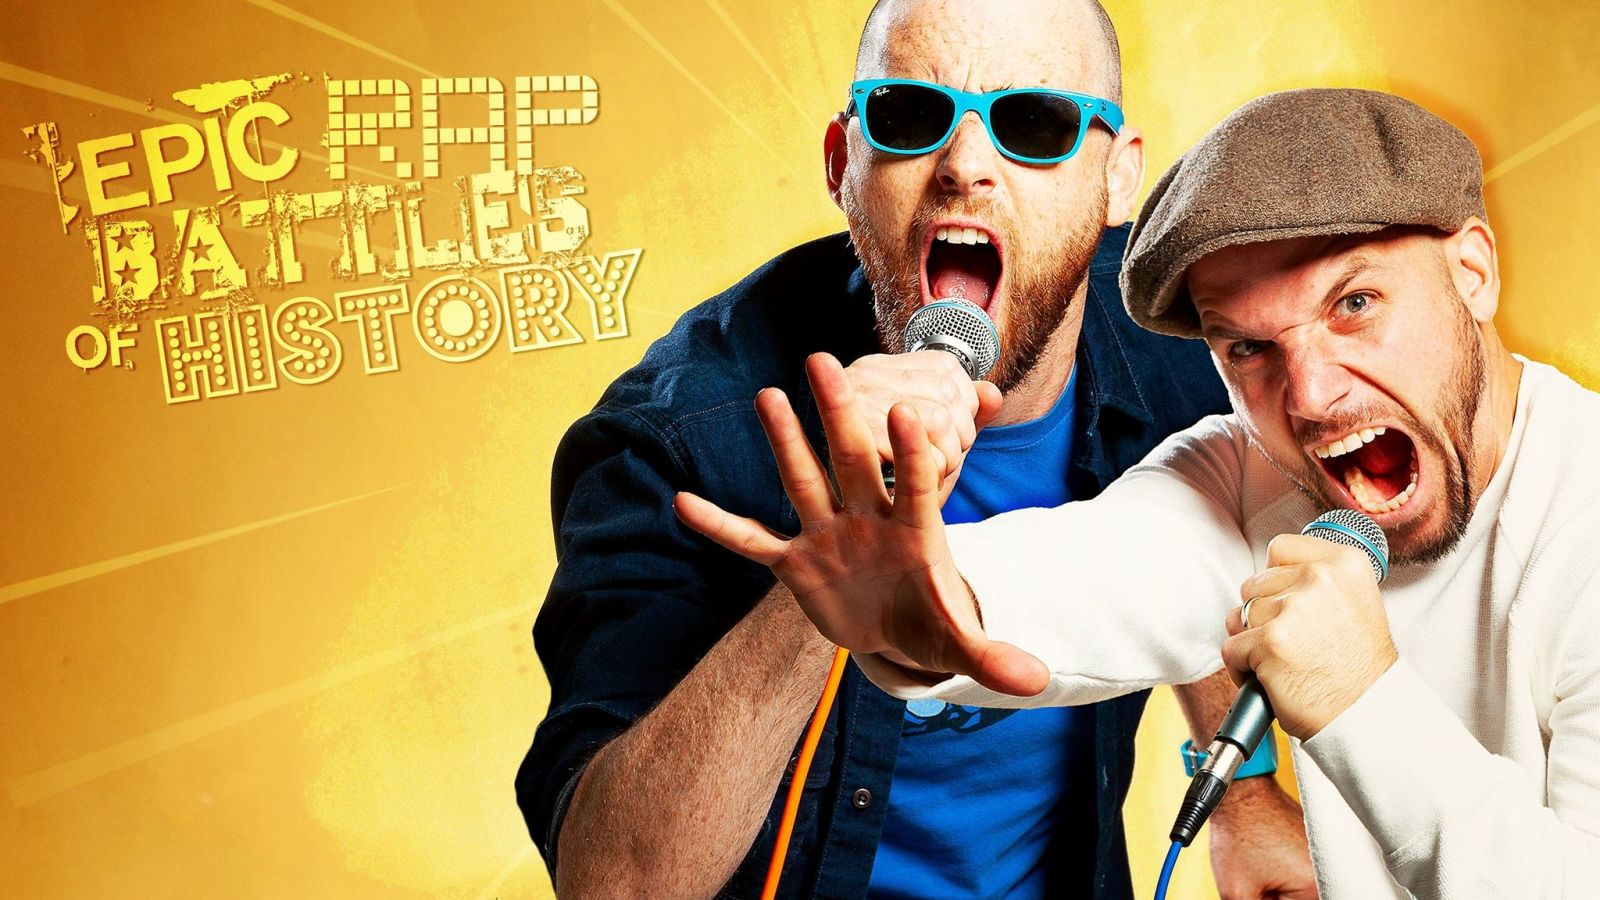 Epic Rap Battles Of History at Clwb Ifor Bach Tickets